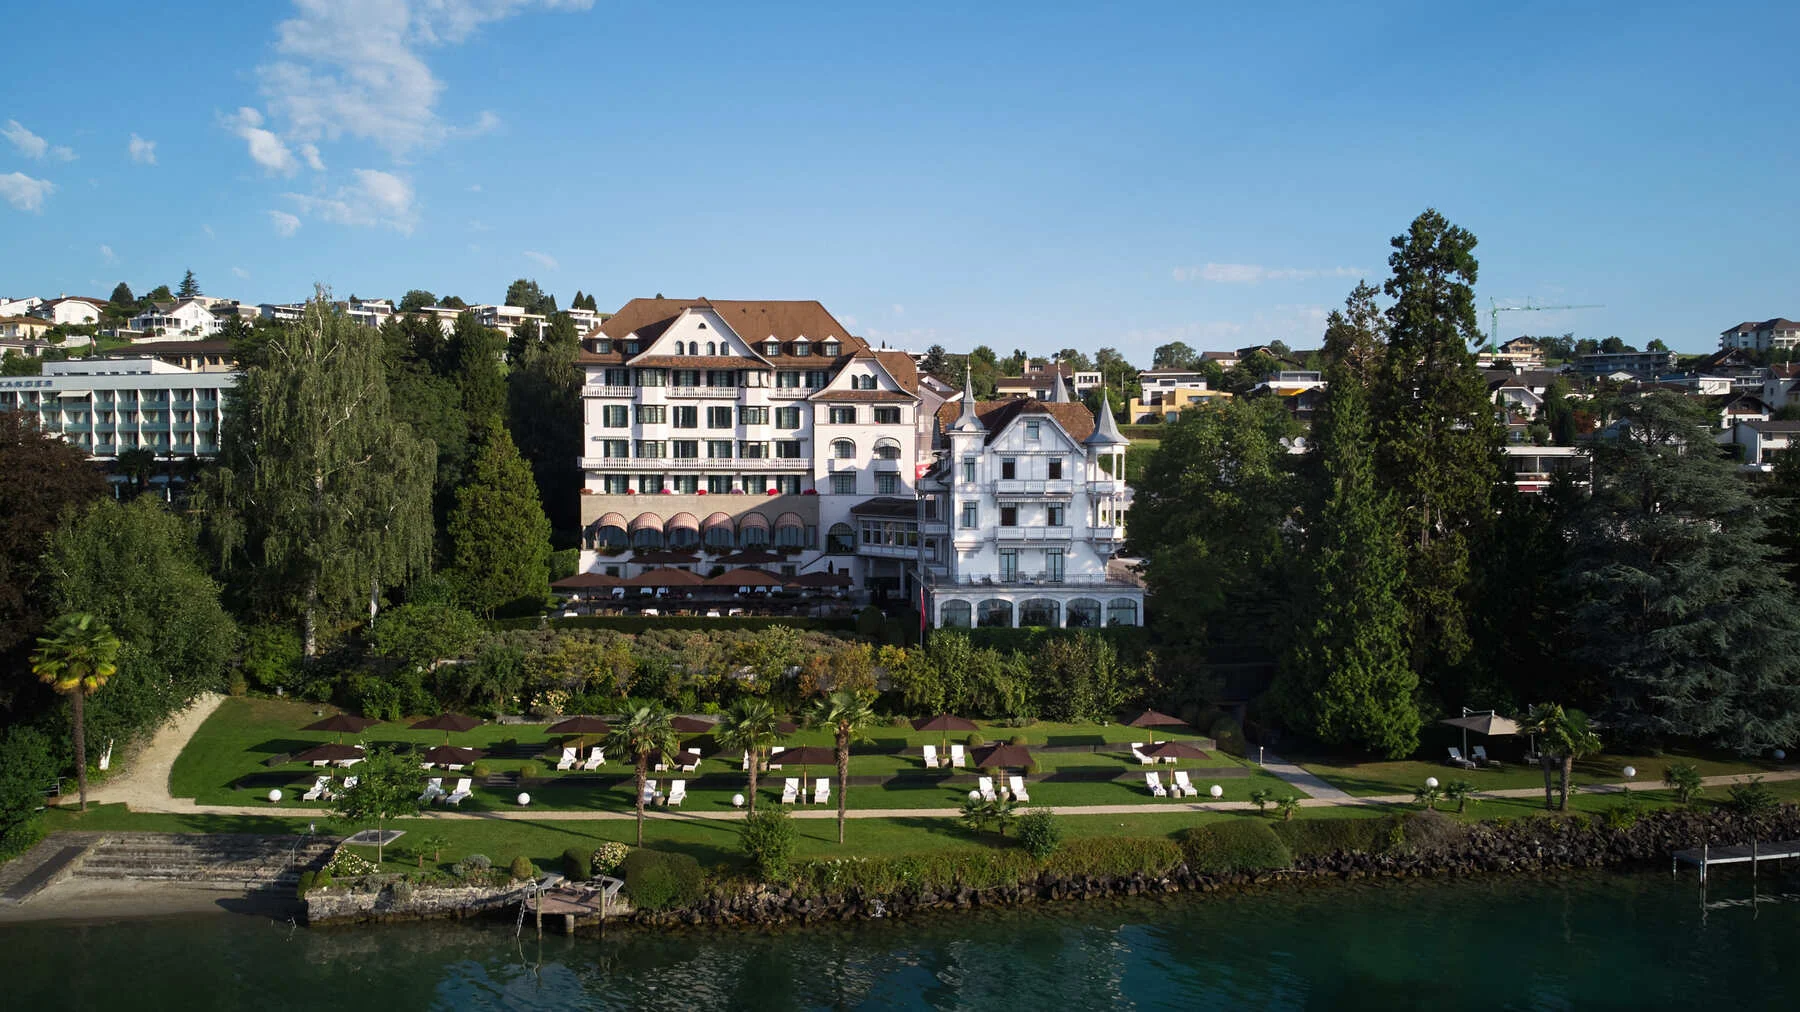 Front view of Chenot Palace Weggis from the Lake Lucerne, Switzerland